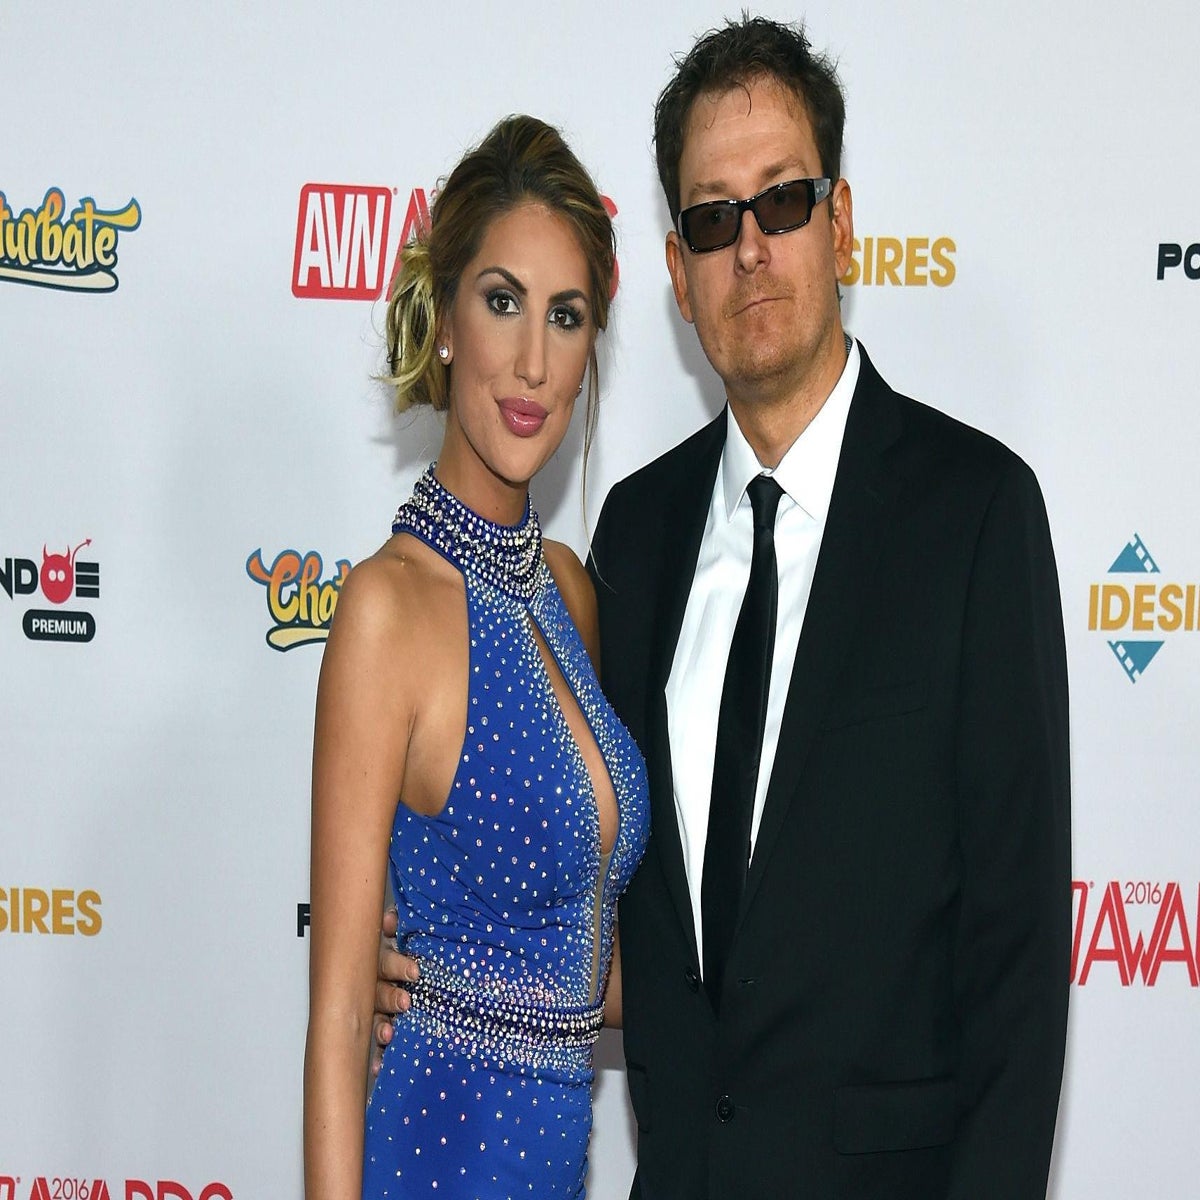 Sister Phone Sex Blackmail Brother - August Ames dead: Adult actor's brother says cyber bullying 'cost my baby  sister's life' | The Independent | The Independent